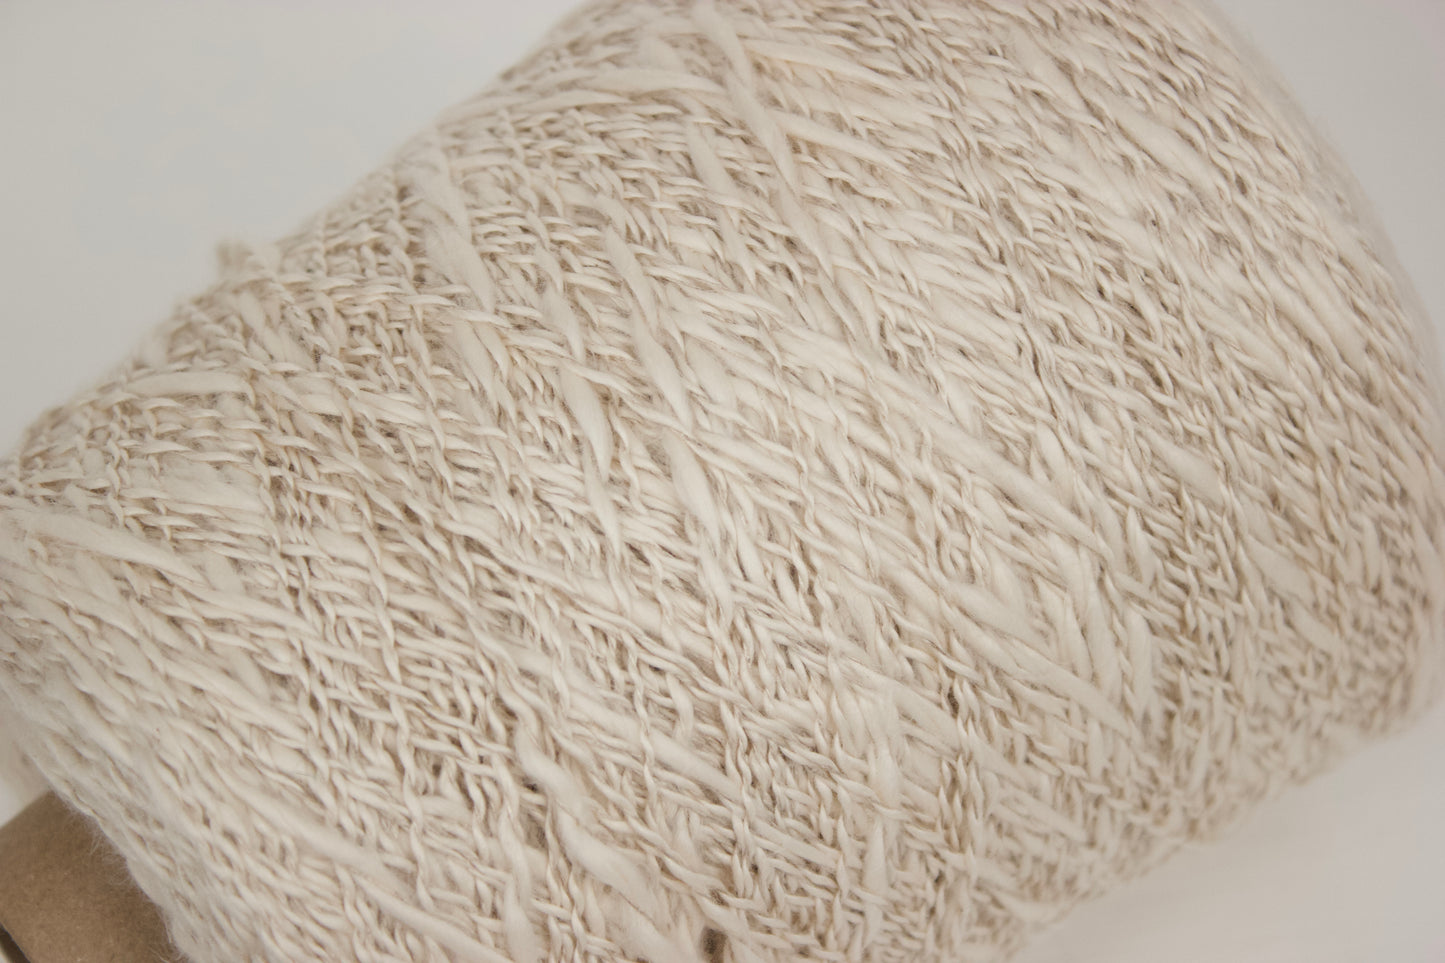 Linen & Cotton Slub - Undyed Yarn for Dyers - Special Order Only